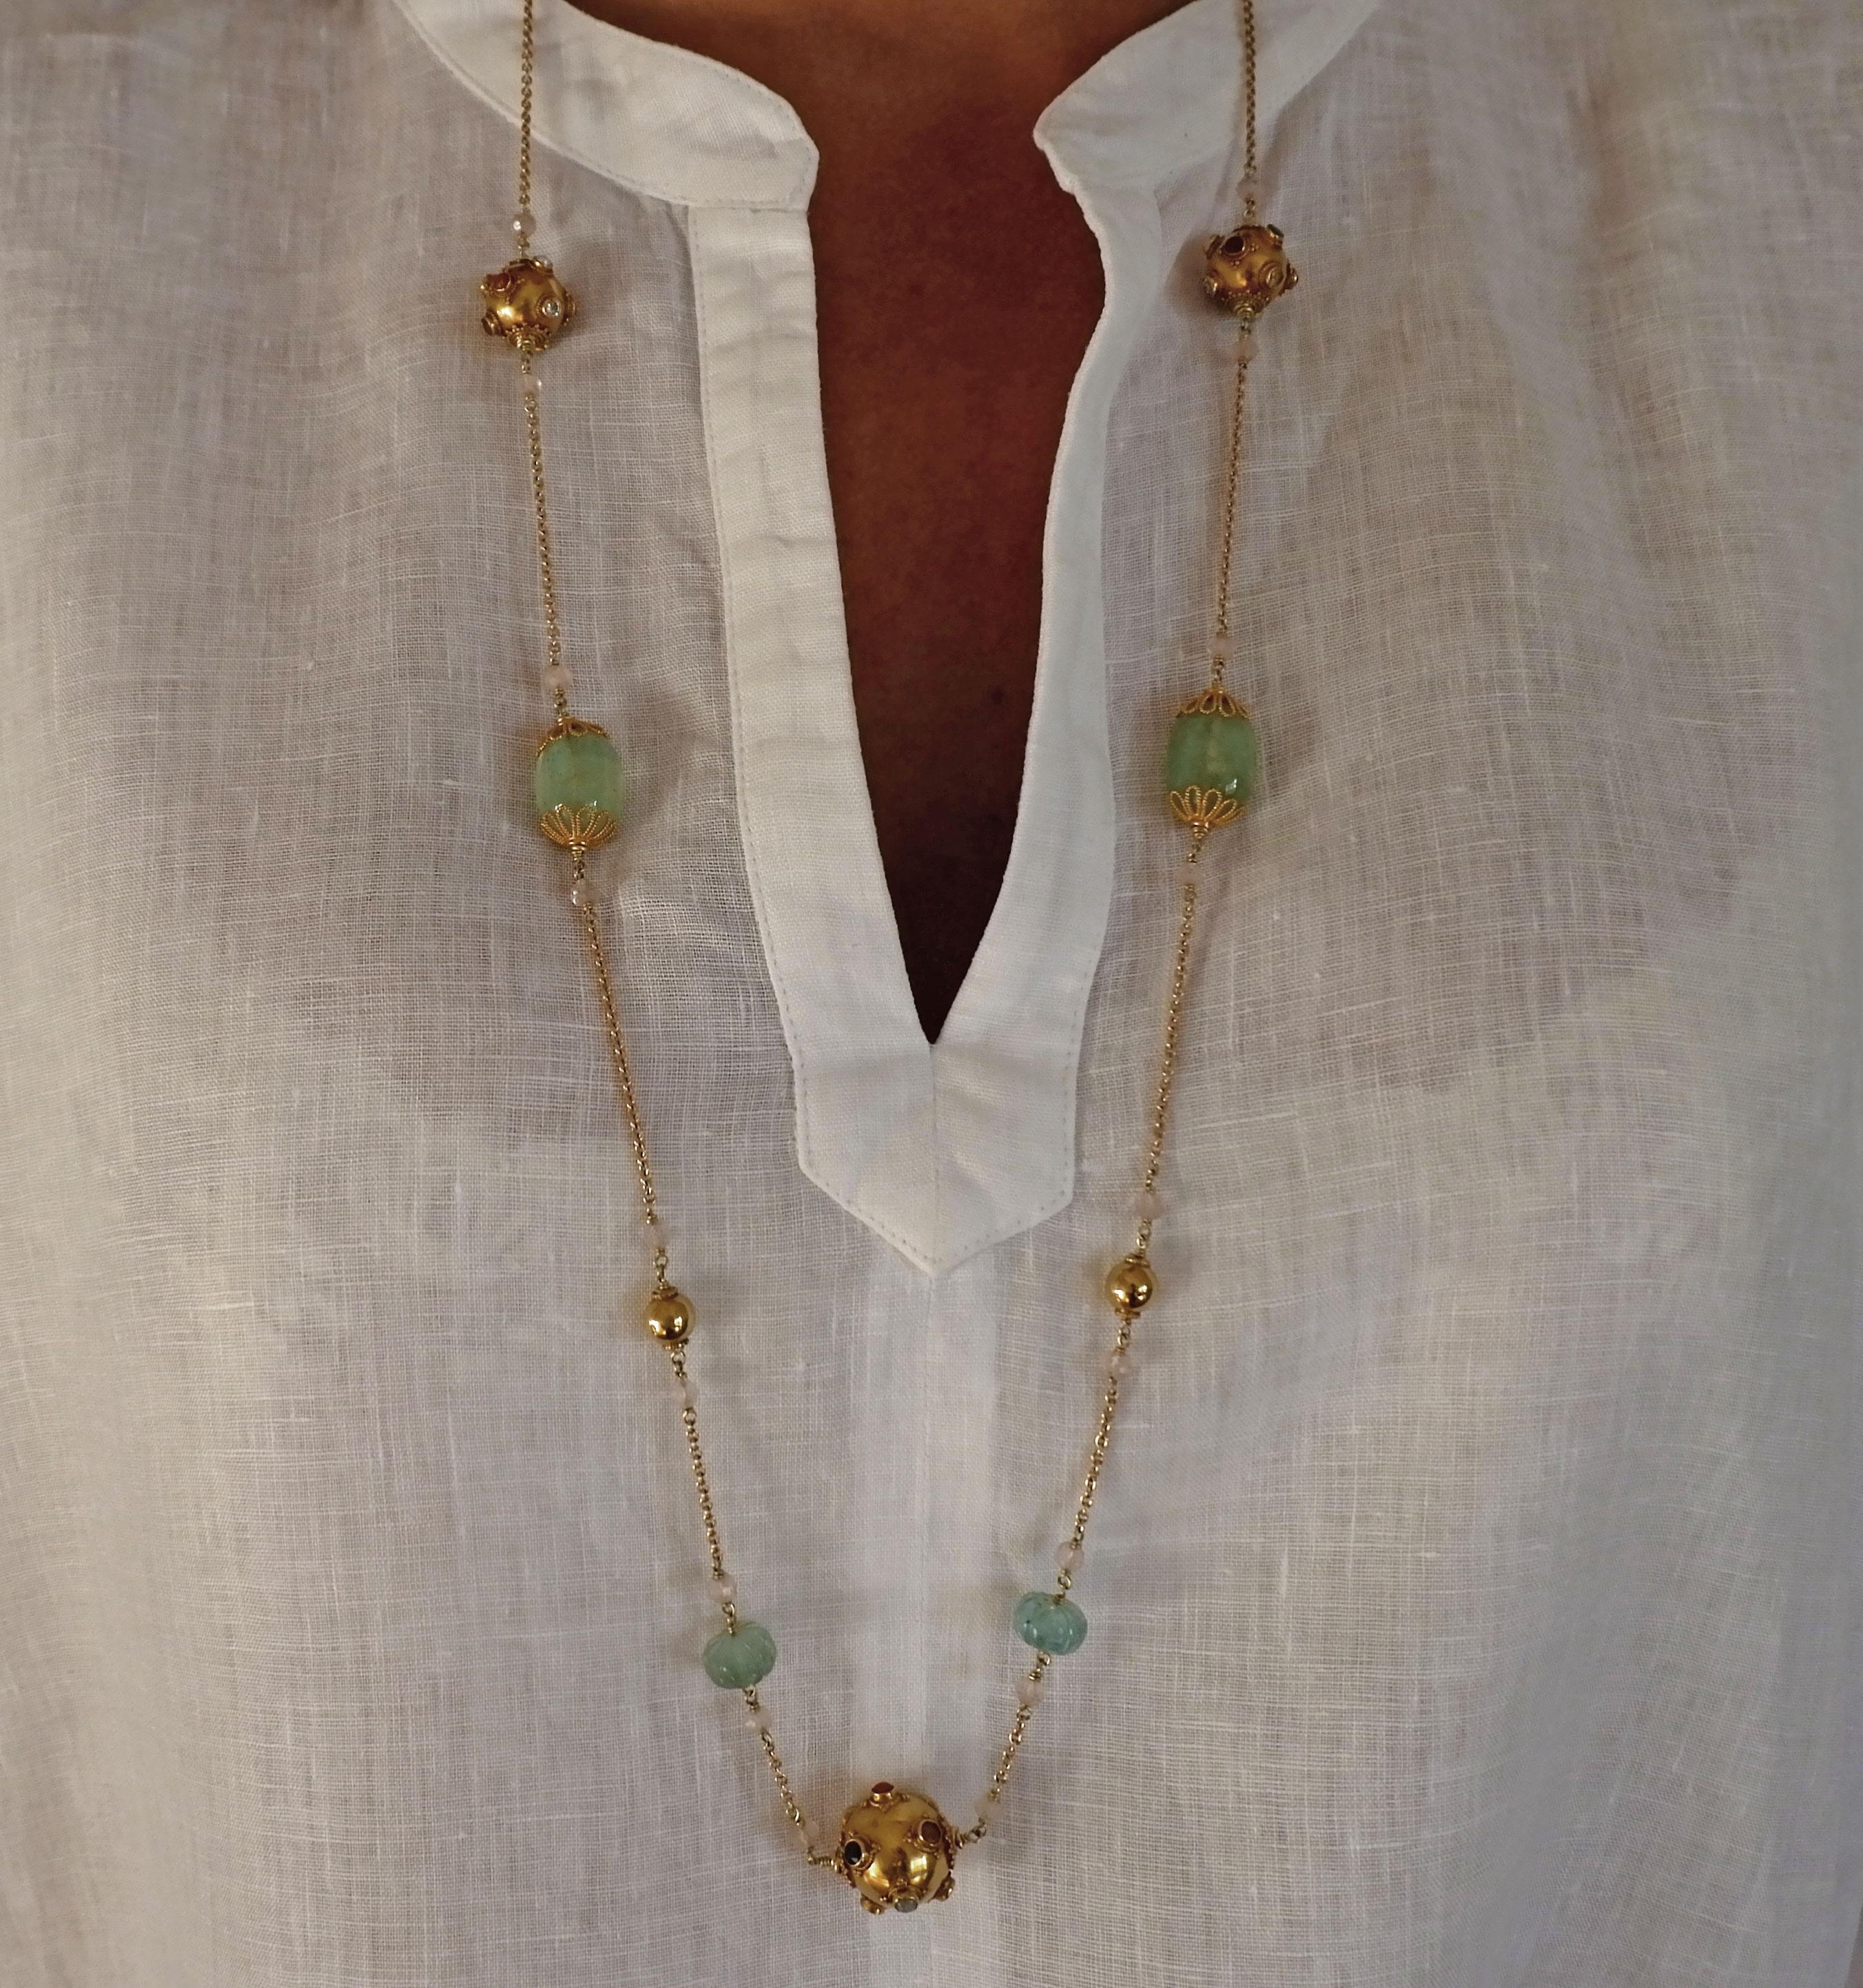 A unique and precious Sautoir Necklace inspired by the ancient silk trade routes. Hand crafted 18 karat gold Indian beads are set with an array of precious stones such as, corals, pearls, emeralds, rubies, diamonds, sapphires, citrines and